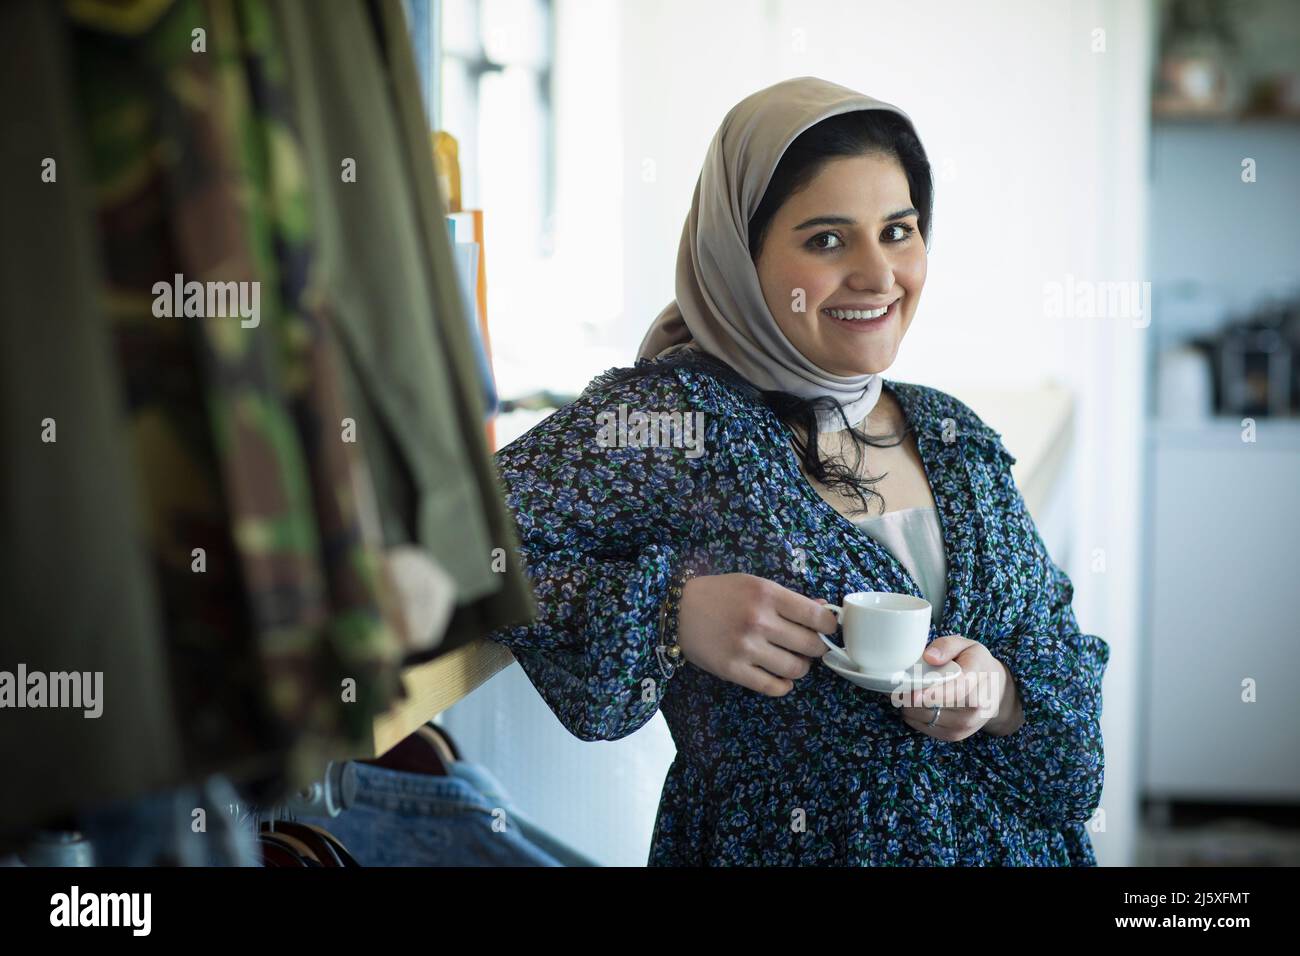 Portrait confident young Muslim woman in hijab drinking coffee Stock Photo